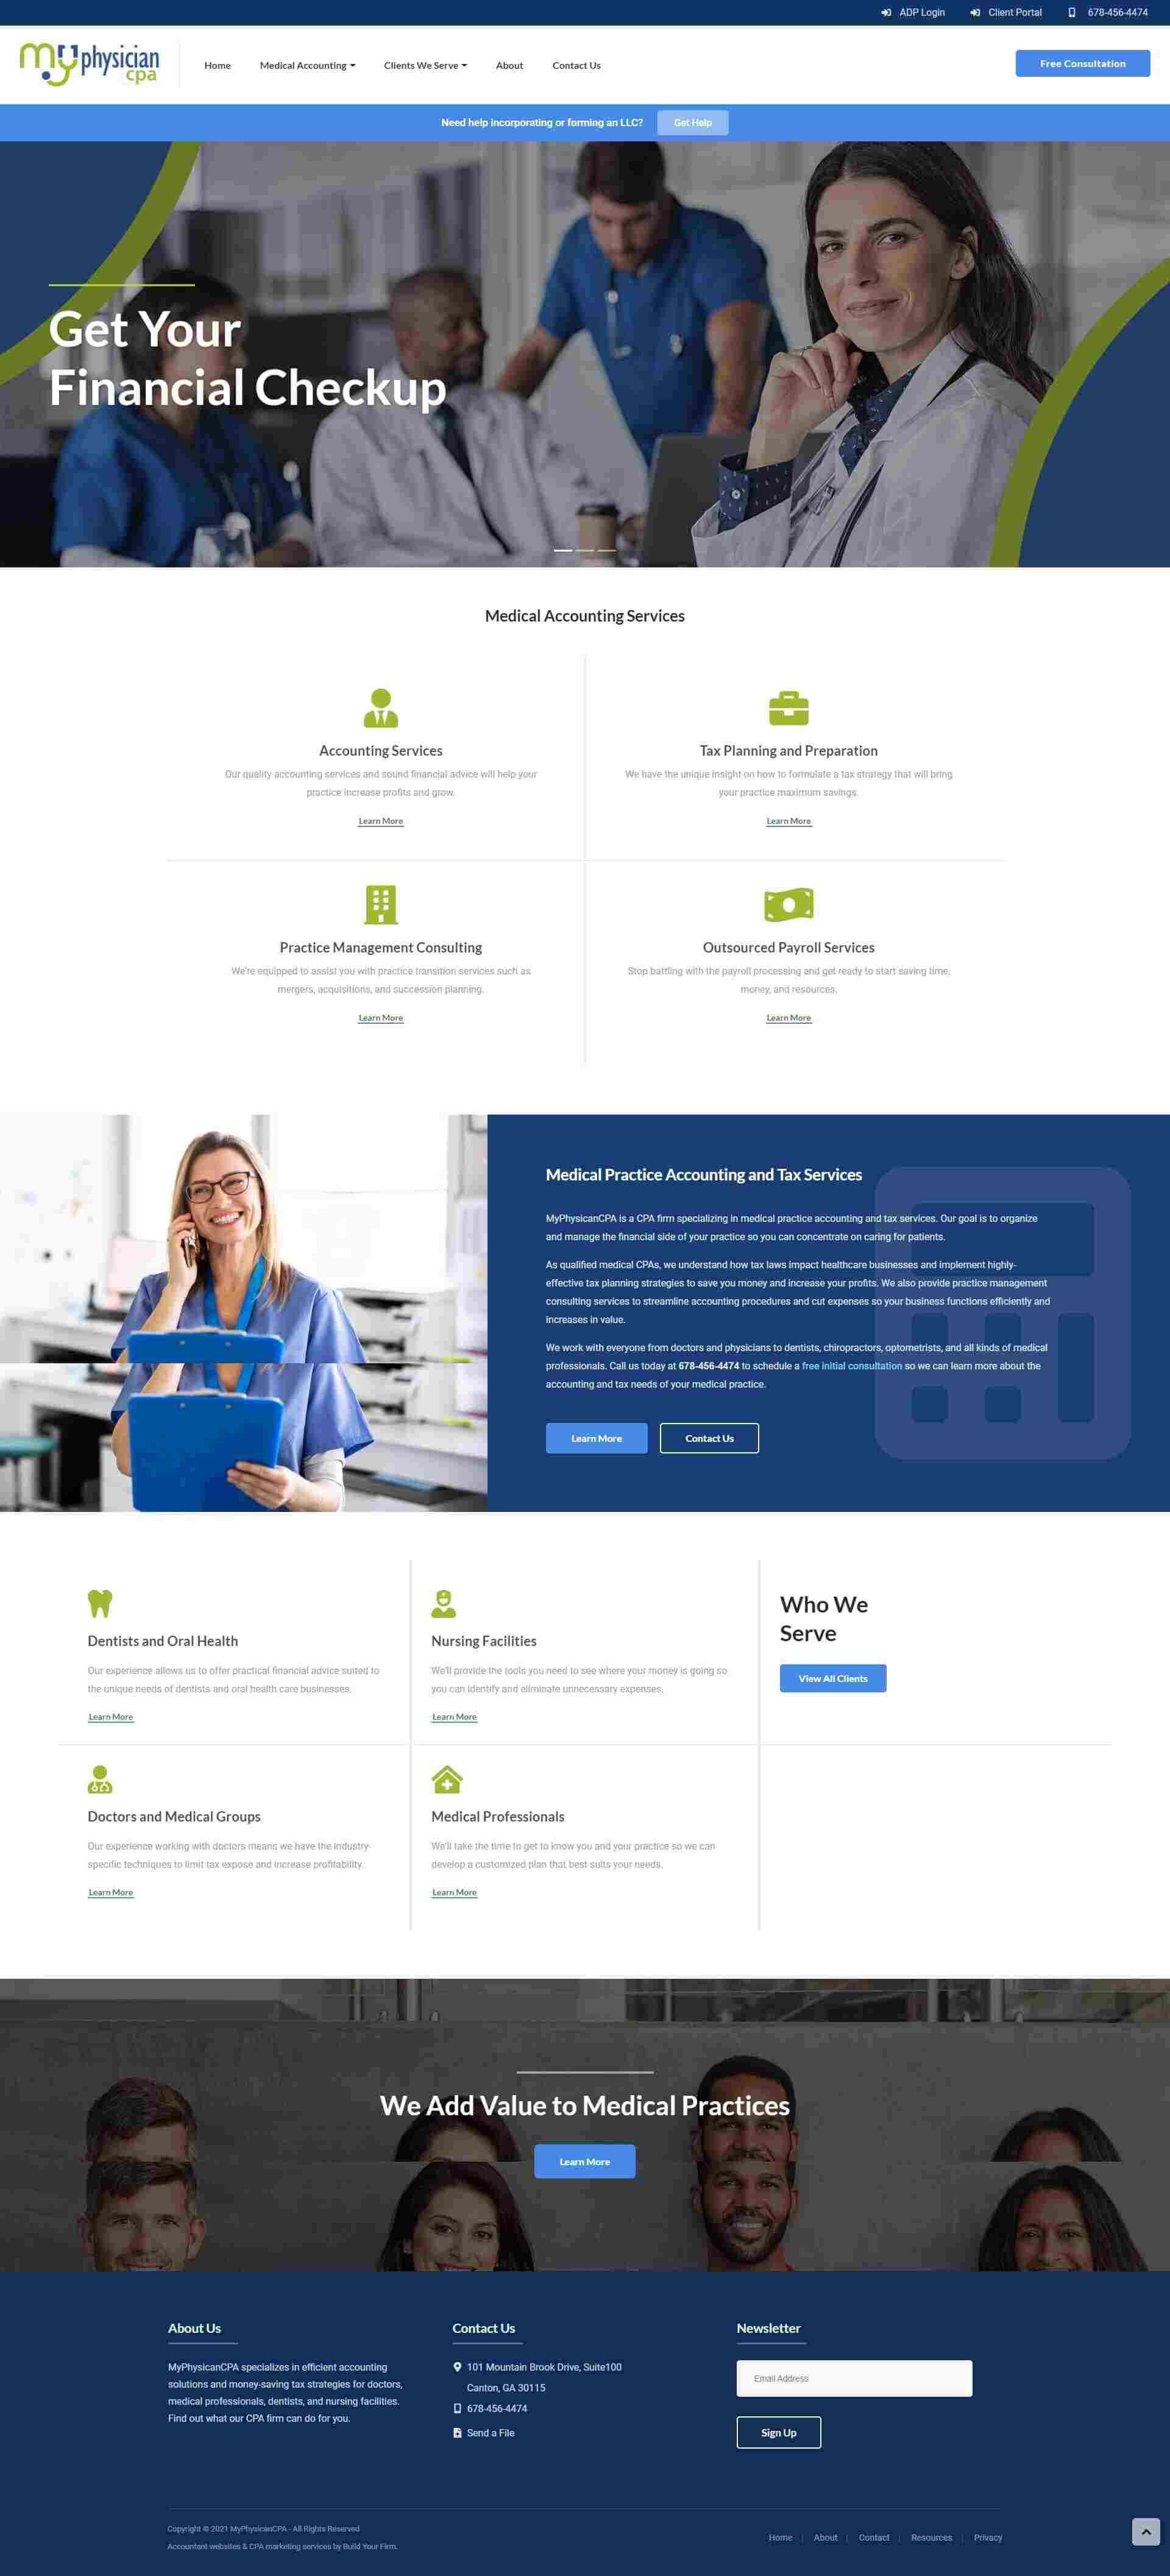 Website Development for Medical Practice Accounting